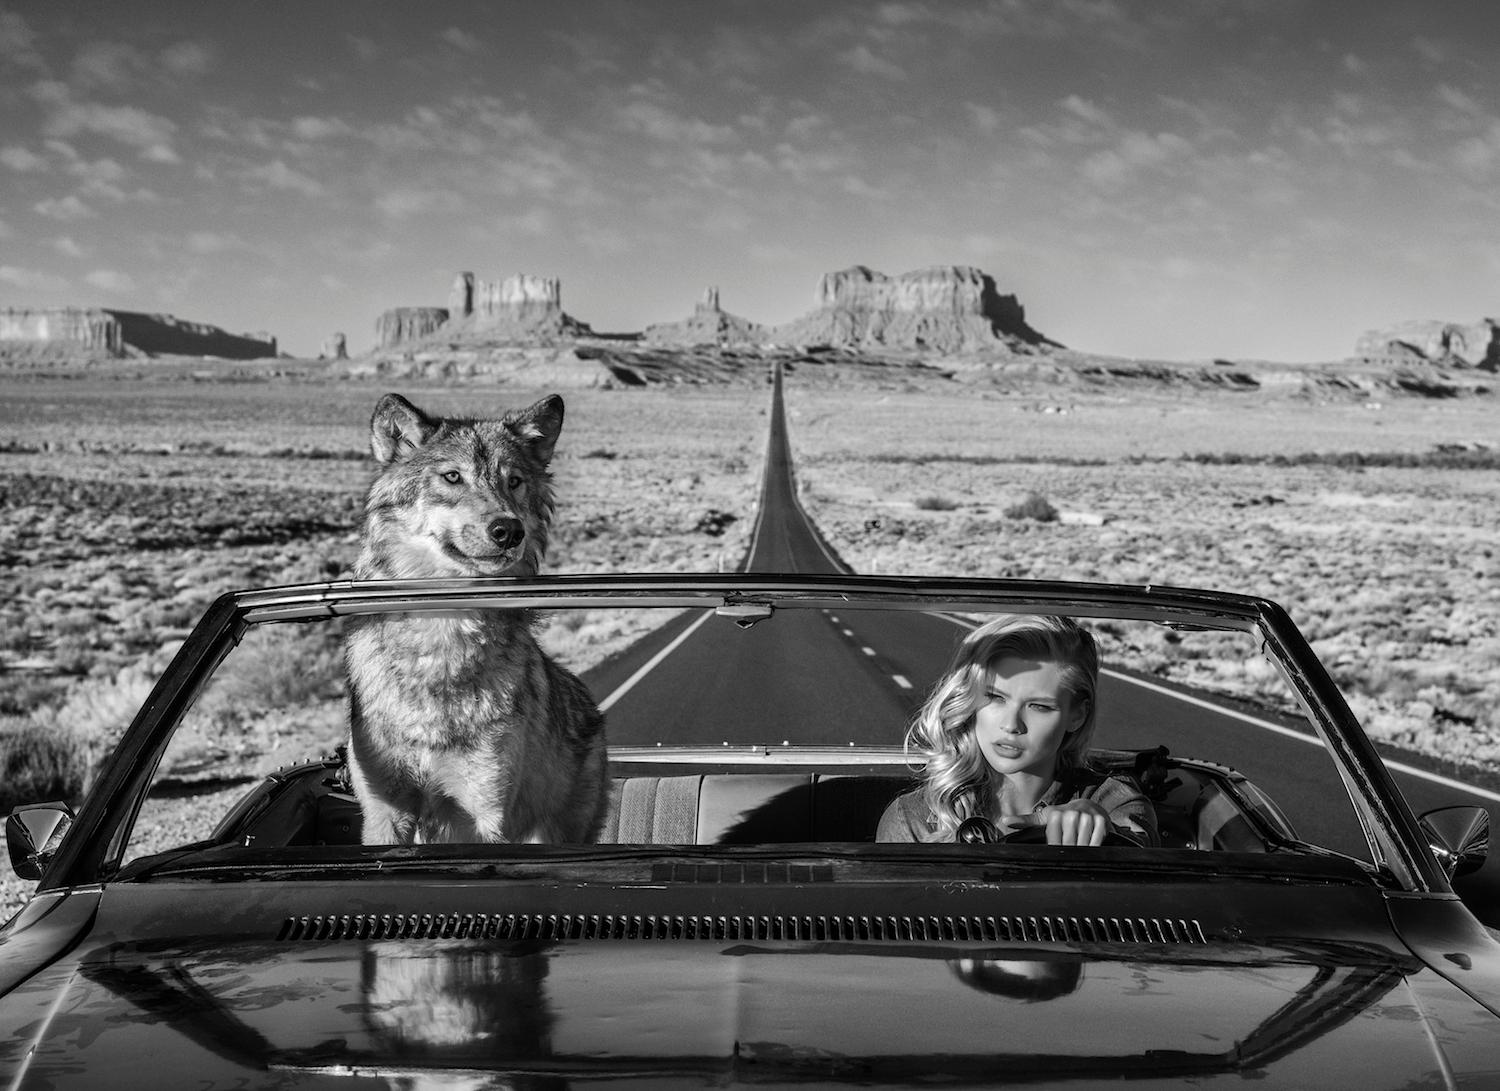 David Yarrow Black and White Photograph - Road trip, Archival pigment print, Contemporary Black and White photography